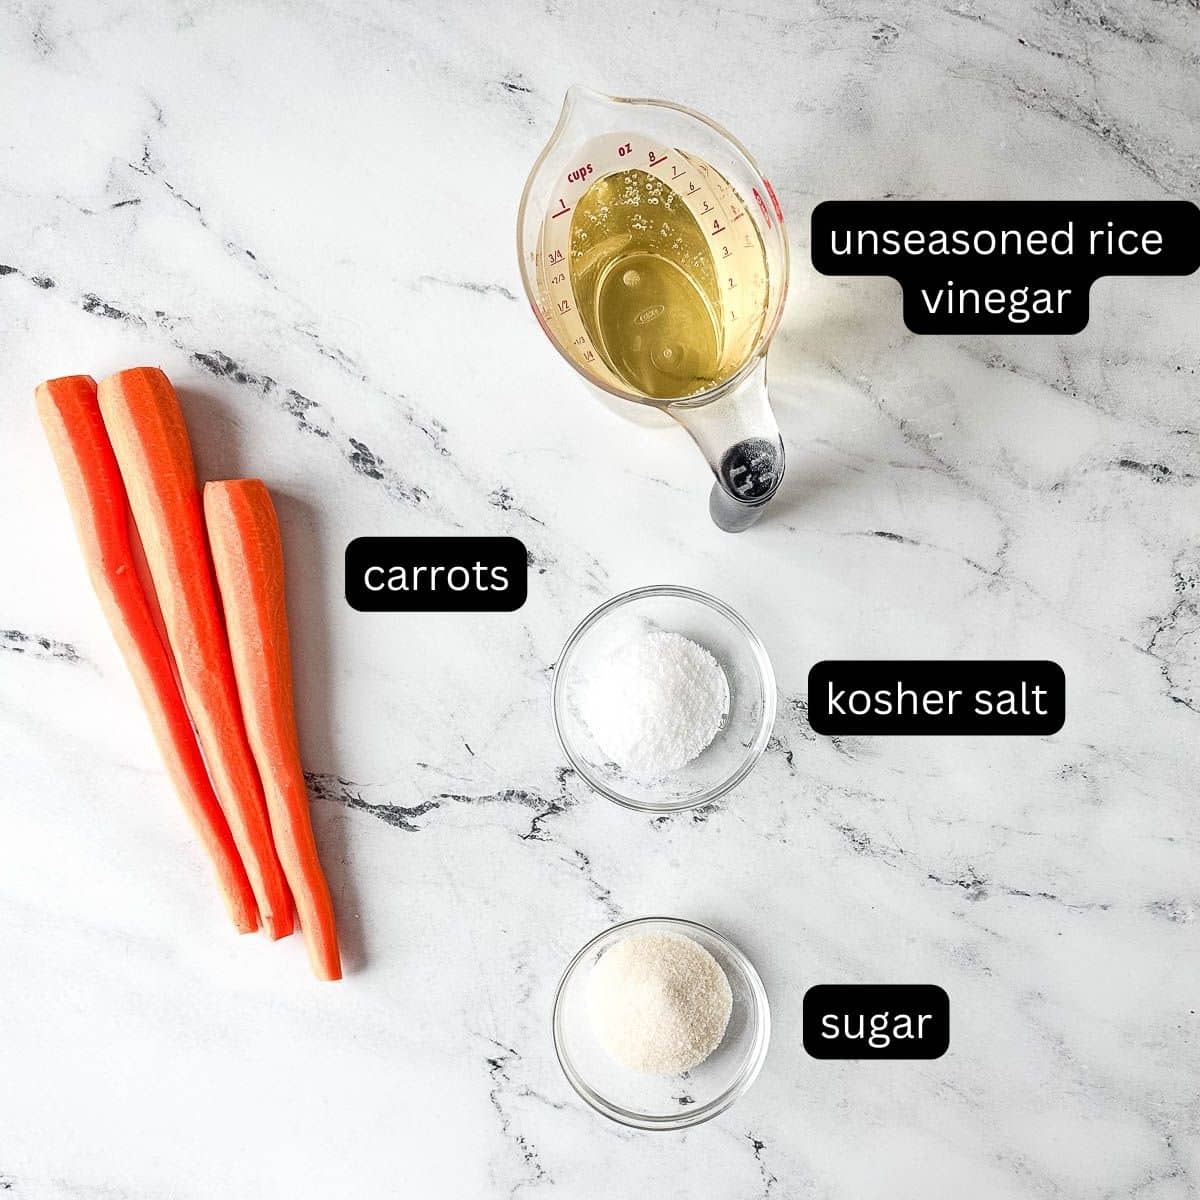 The labeled ingredients for pickled carrots are shown on a marble countertop.